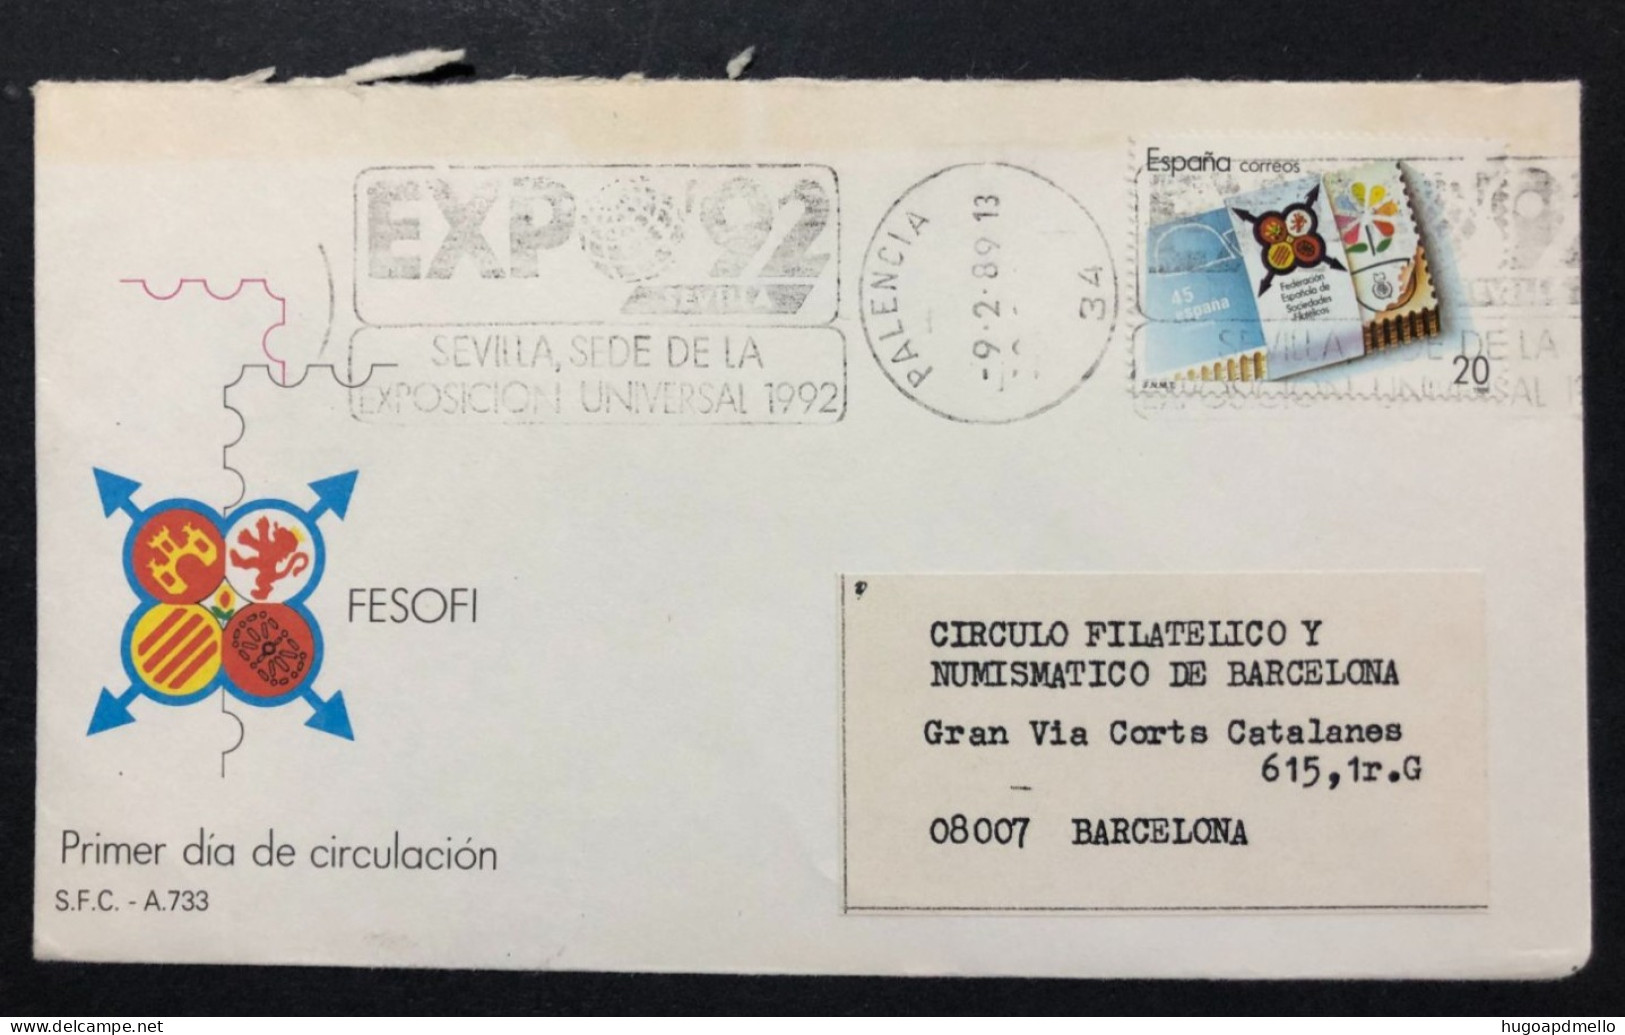 SPAIN, Cover With Special Cancellation « EXPO '92 », « PALENCIA Postmark », 1989 - 1992 – Séville (Espagne)